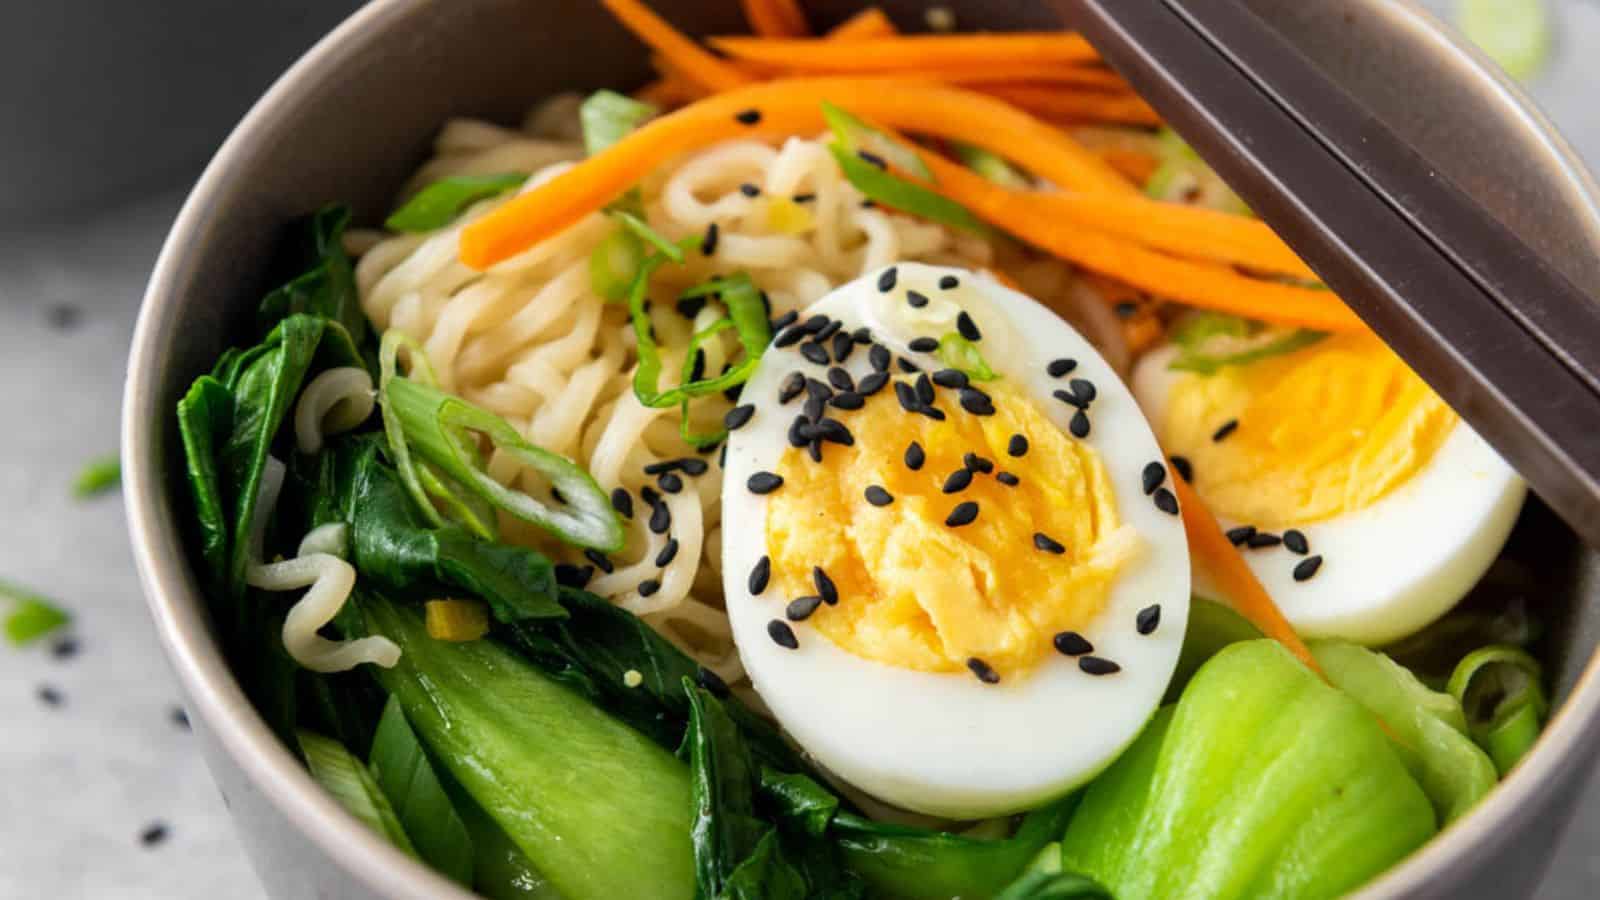 A bowl of ramen with soft-boiled egg, vegetables, and sesame seeds.